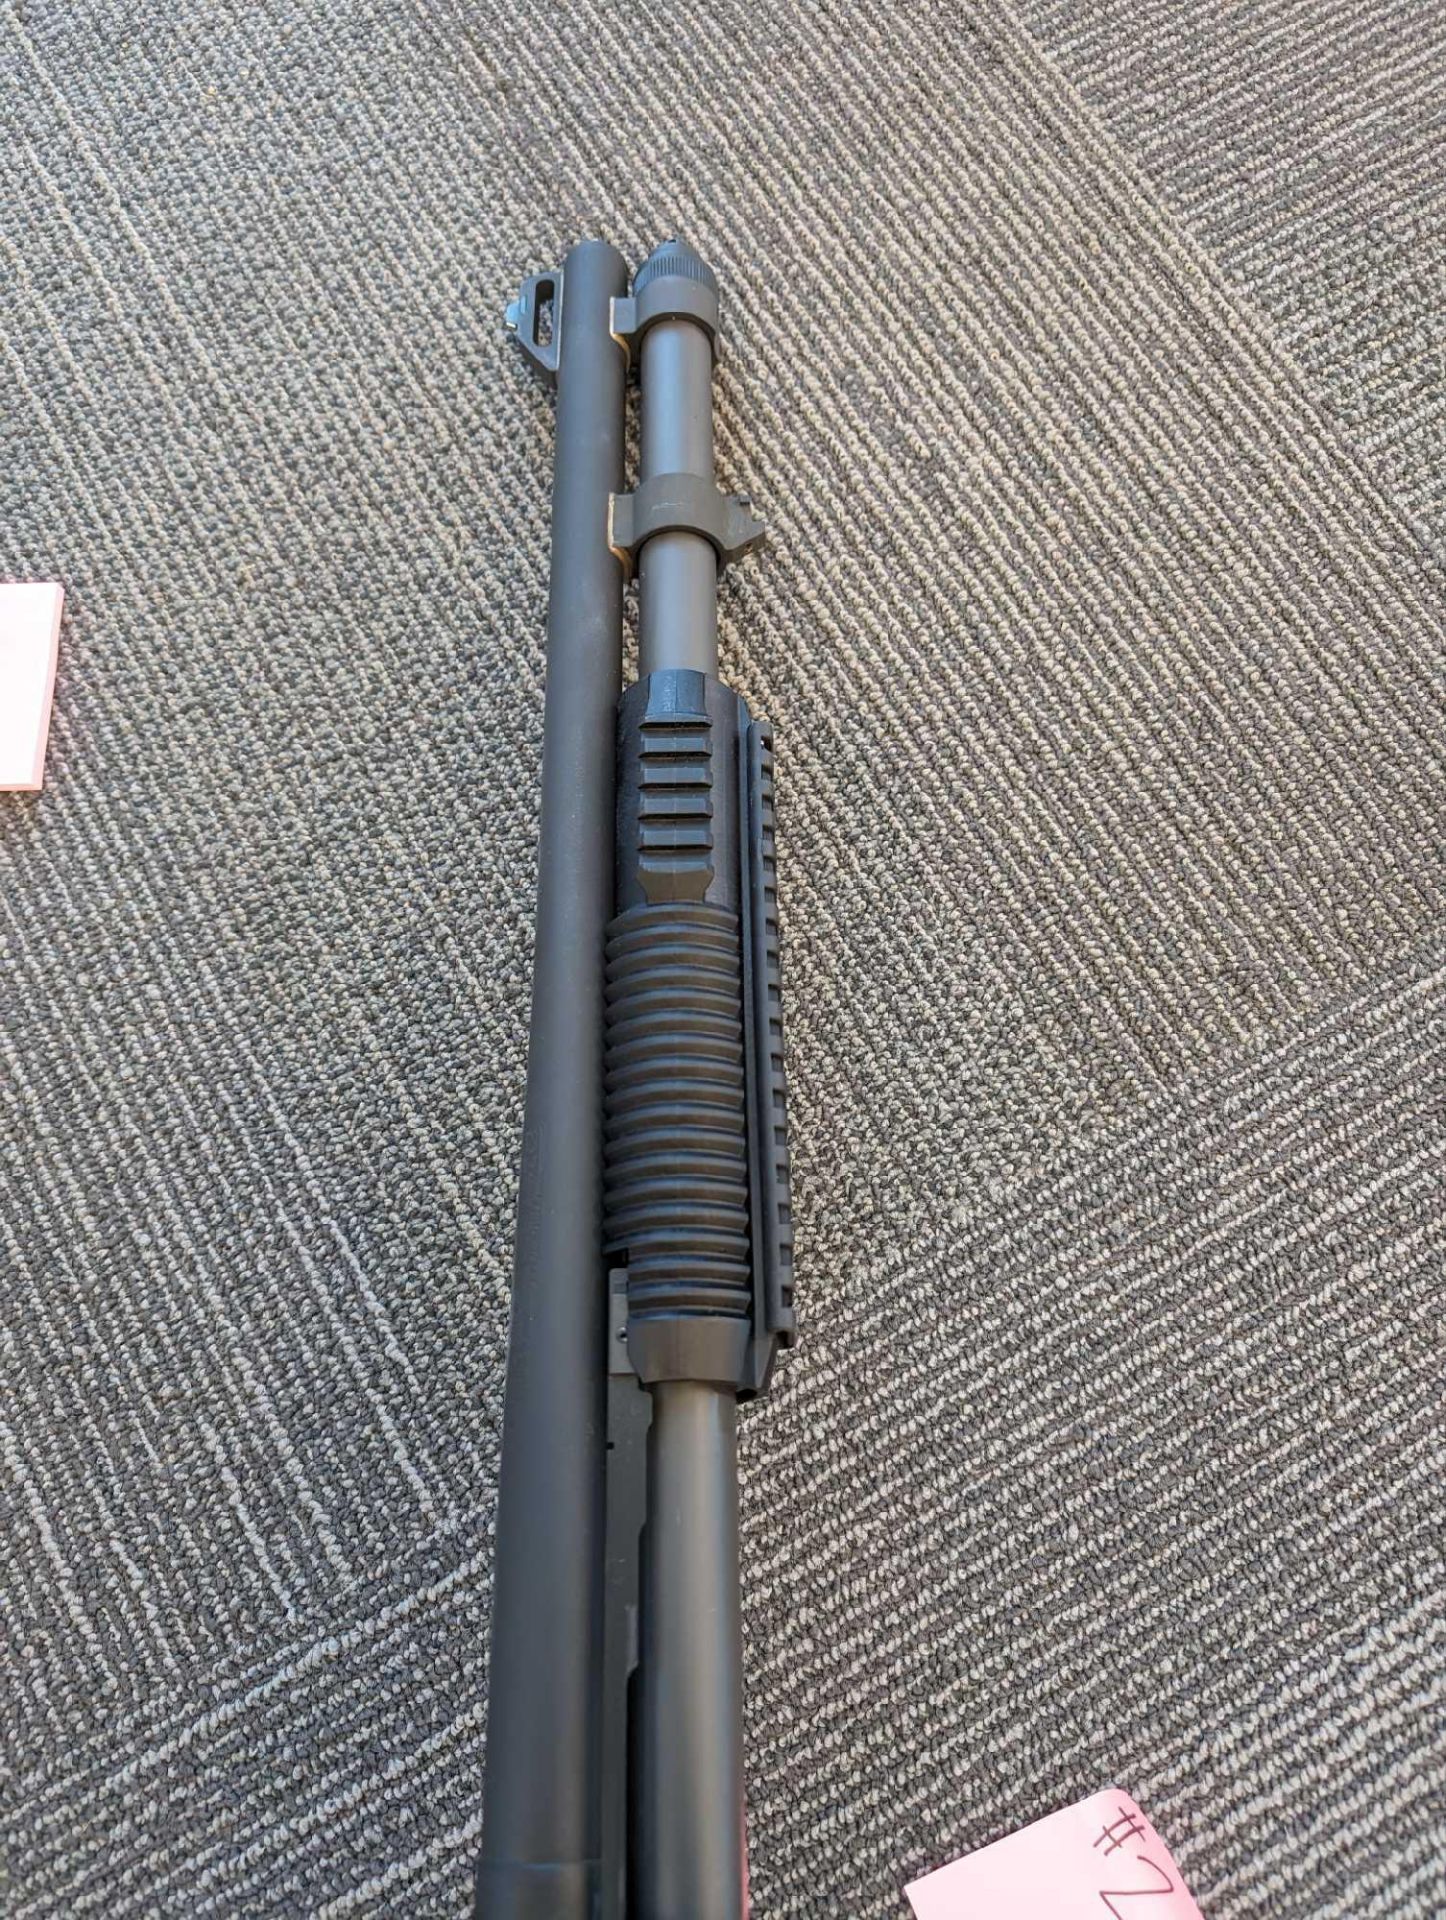 Mossberg model 590 12ga #V0975955   This will only be sold to residents of Utah - Image 8 of 9